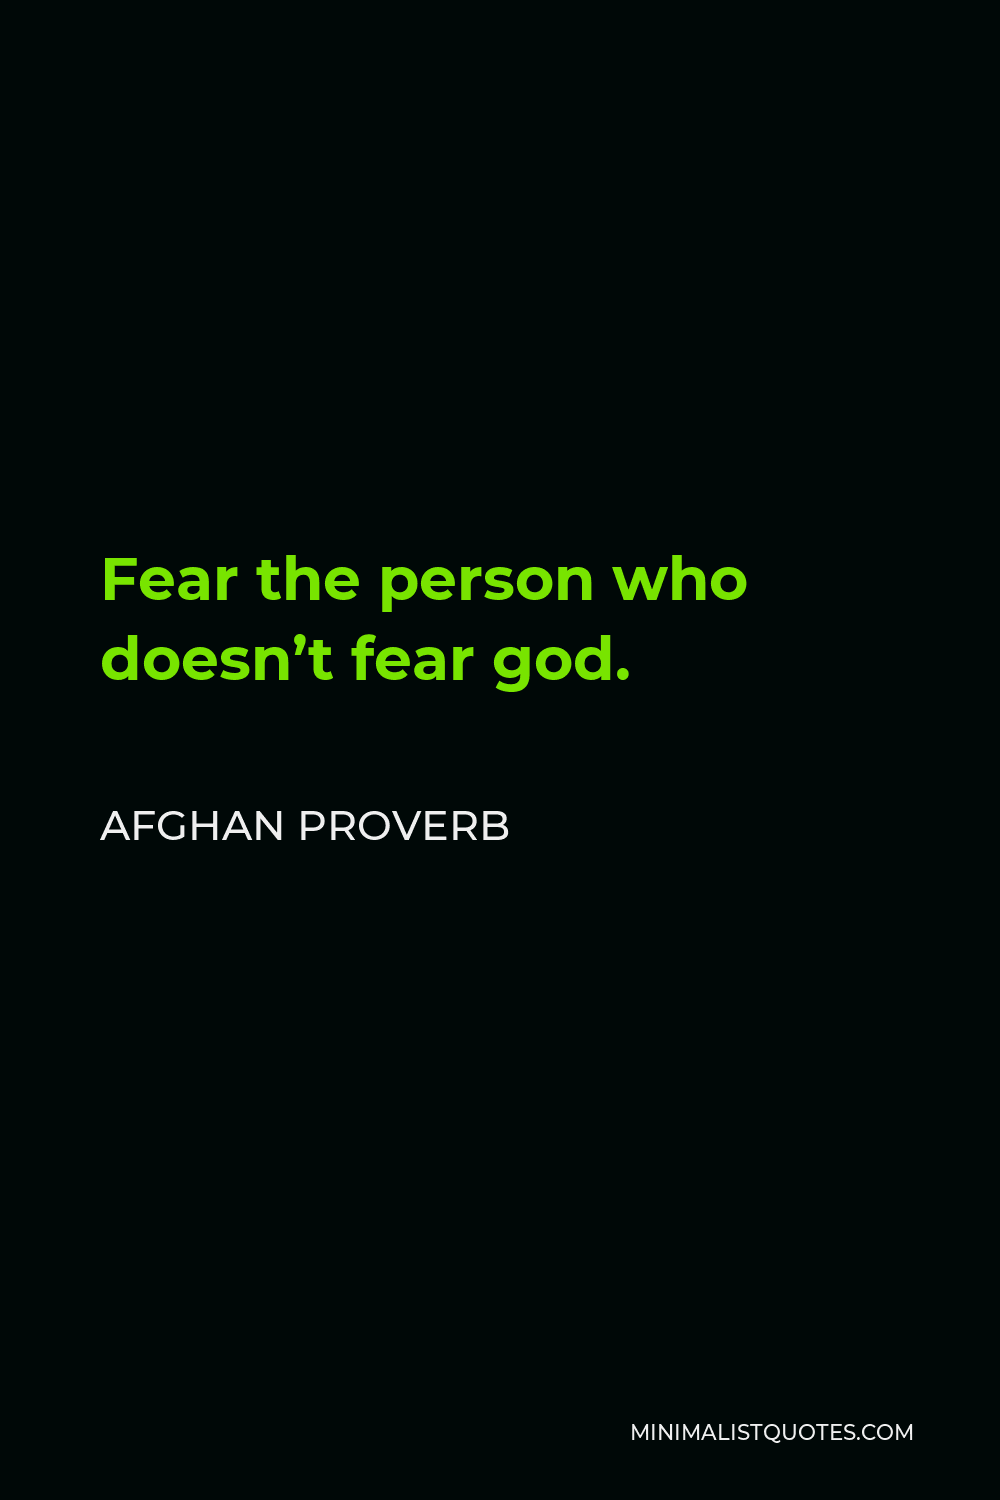 Afghan Proverb Quote - Fear the person who doesn’t fear god.